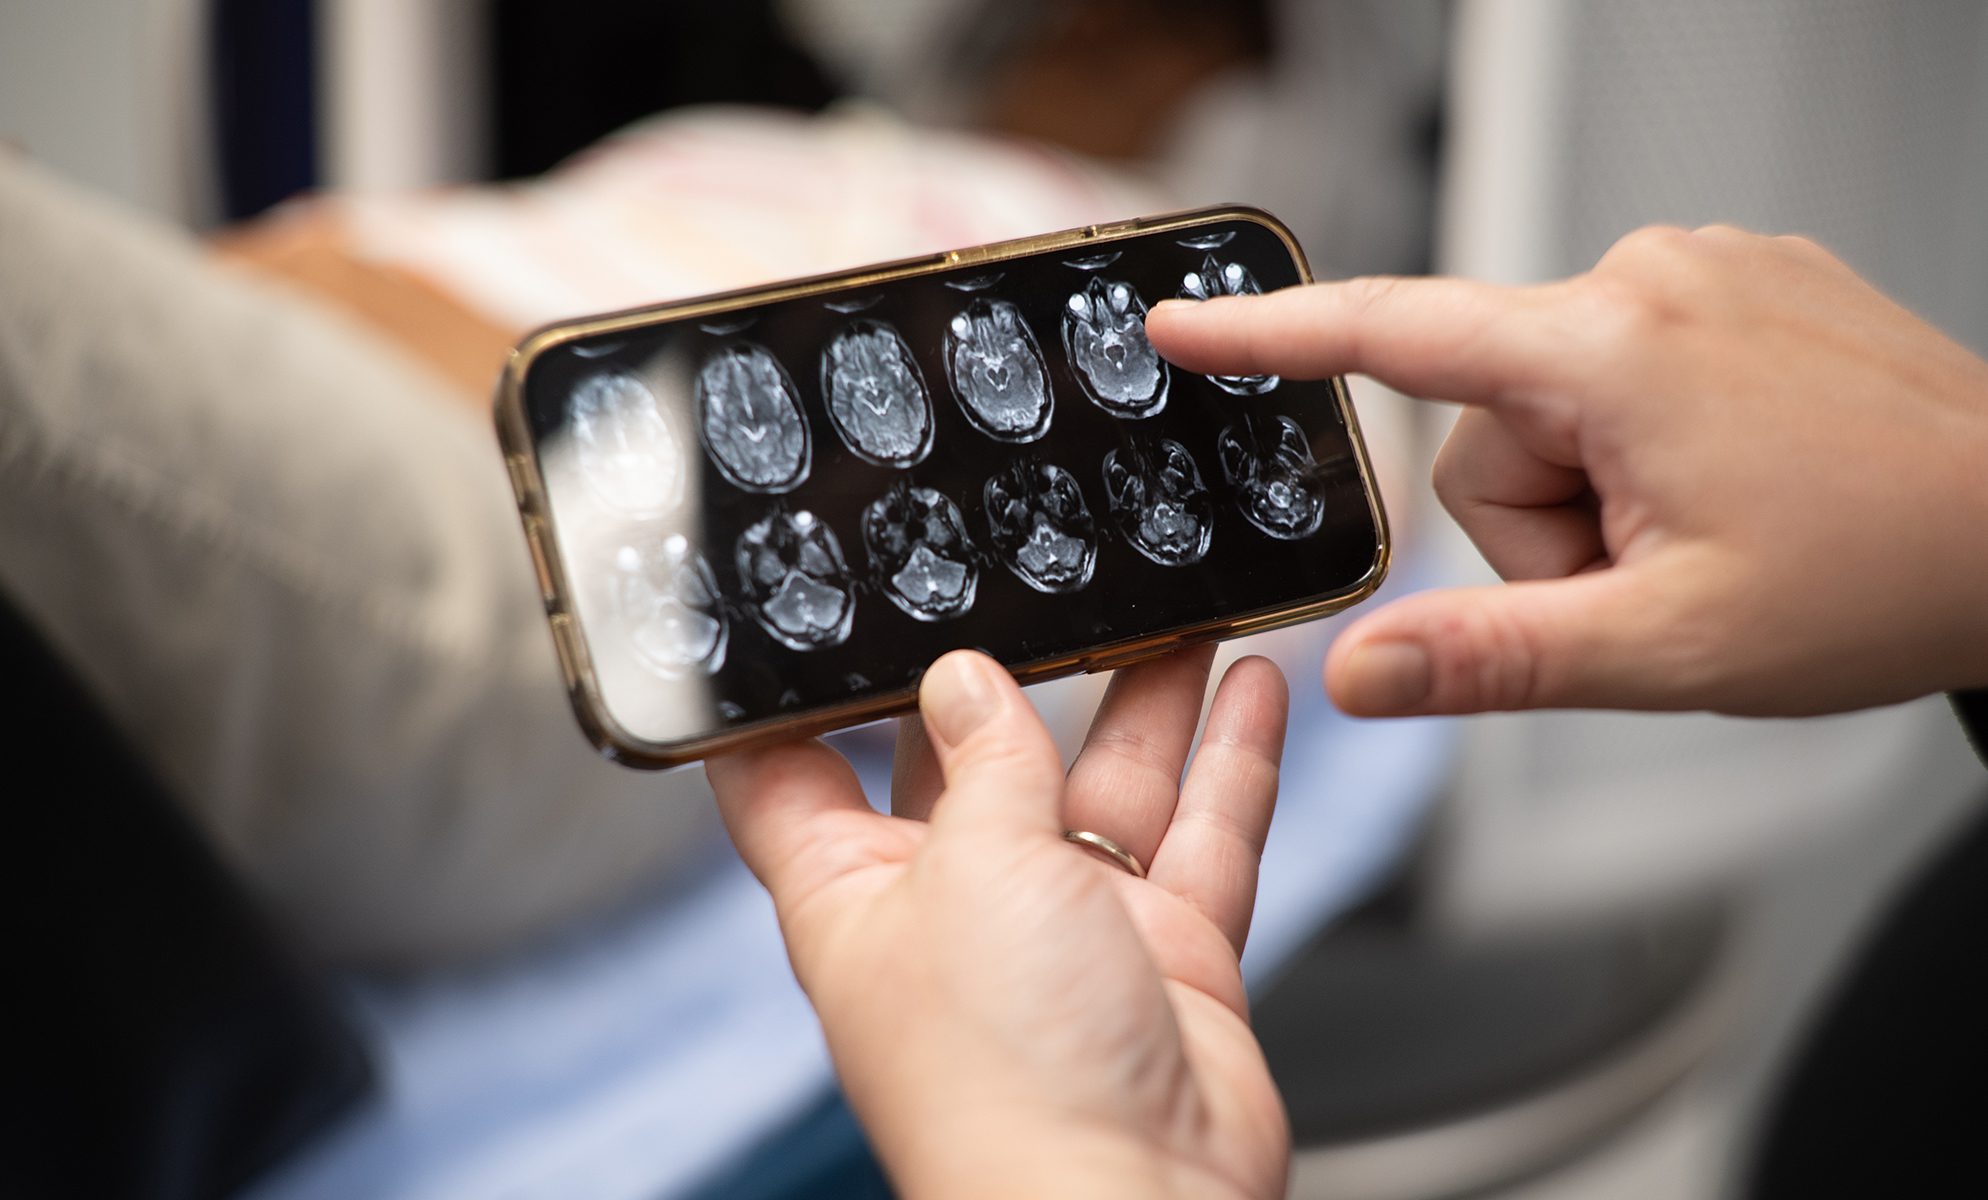 The portable MRI scanner that Dr. Kolind and team work with can be controlled using a smartphone